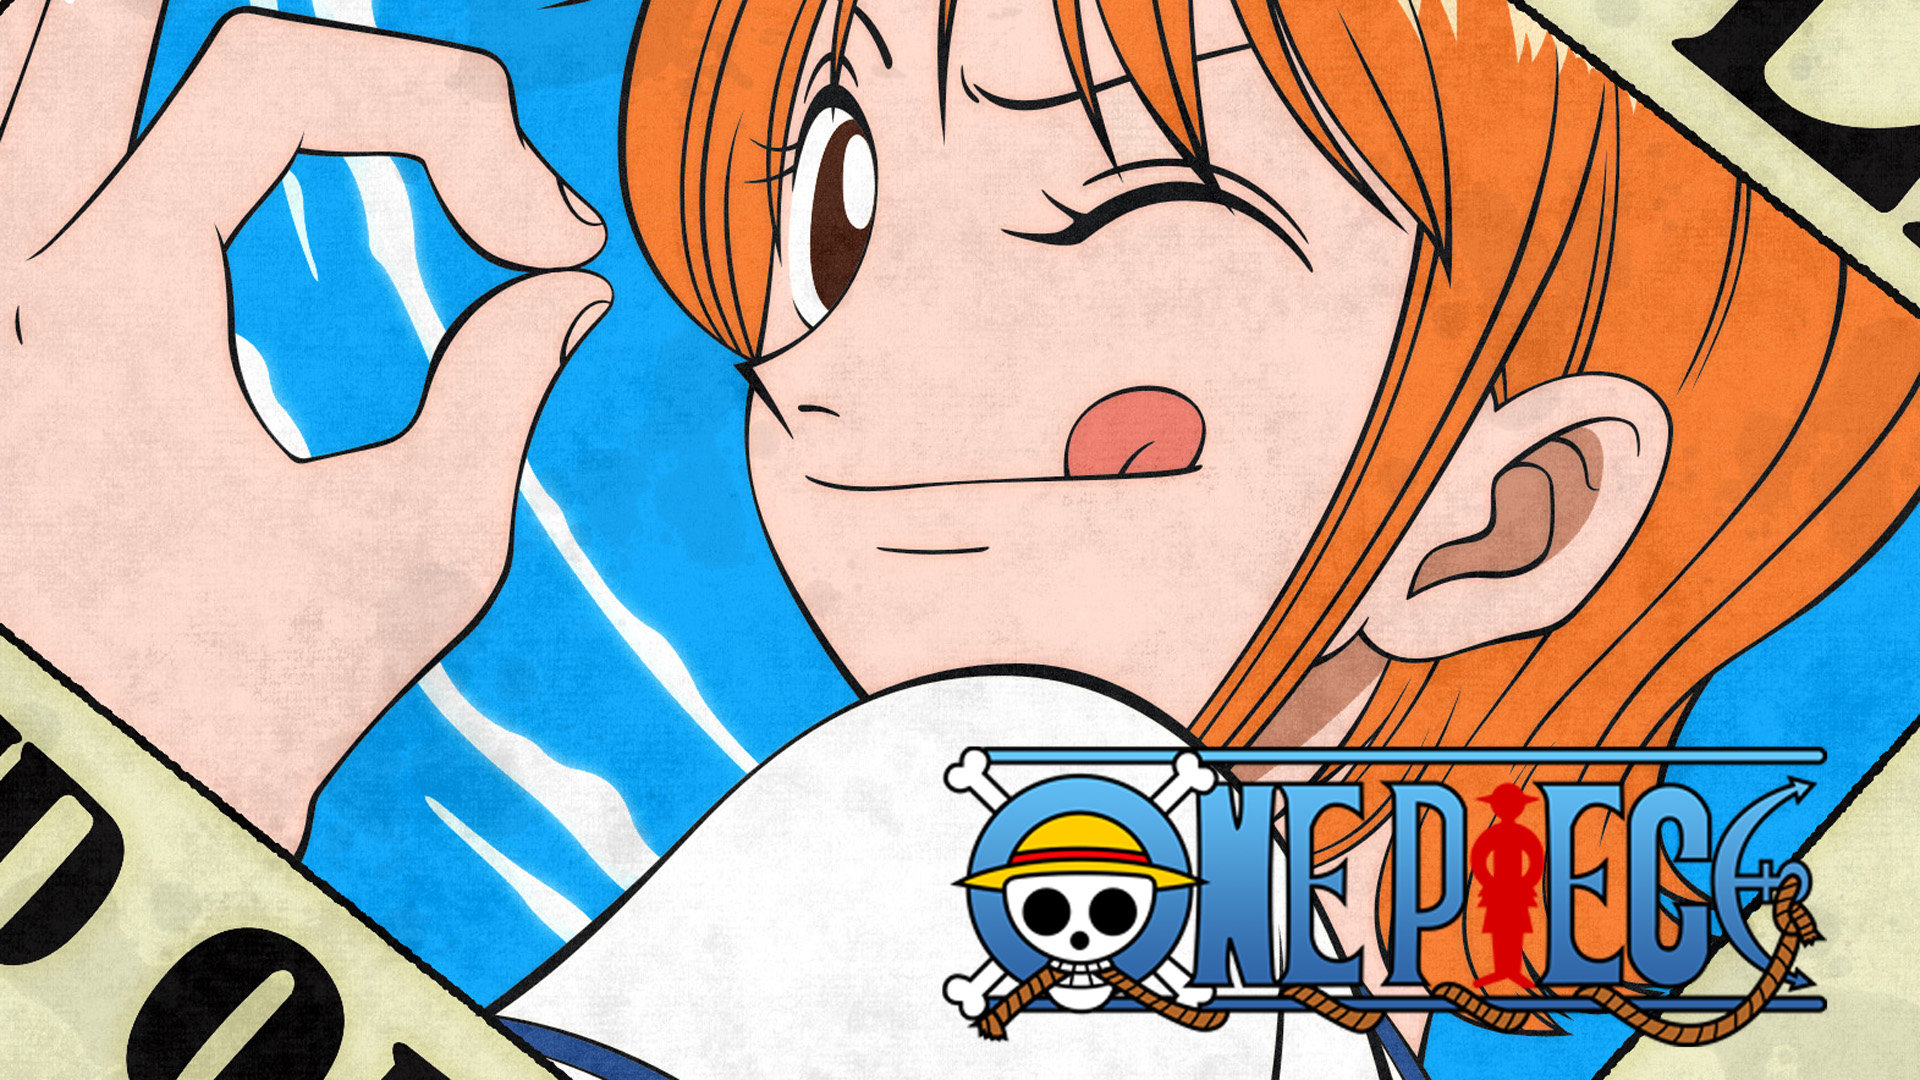 Nami One Piece Wallpapers Hd For Desktop Backgrounds